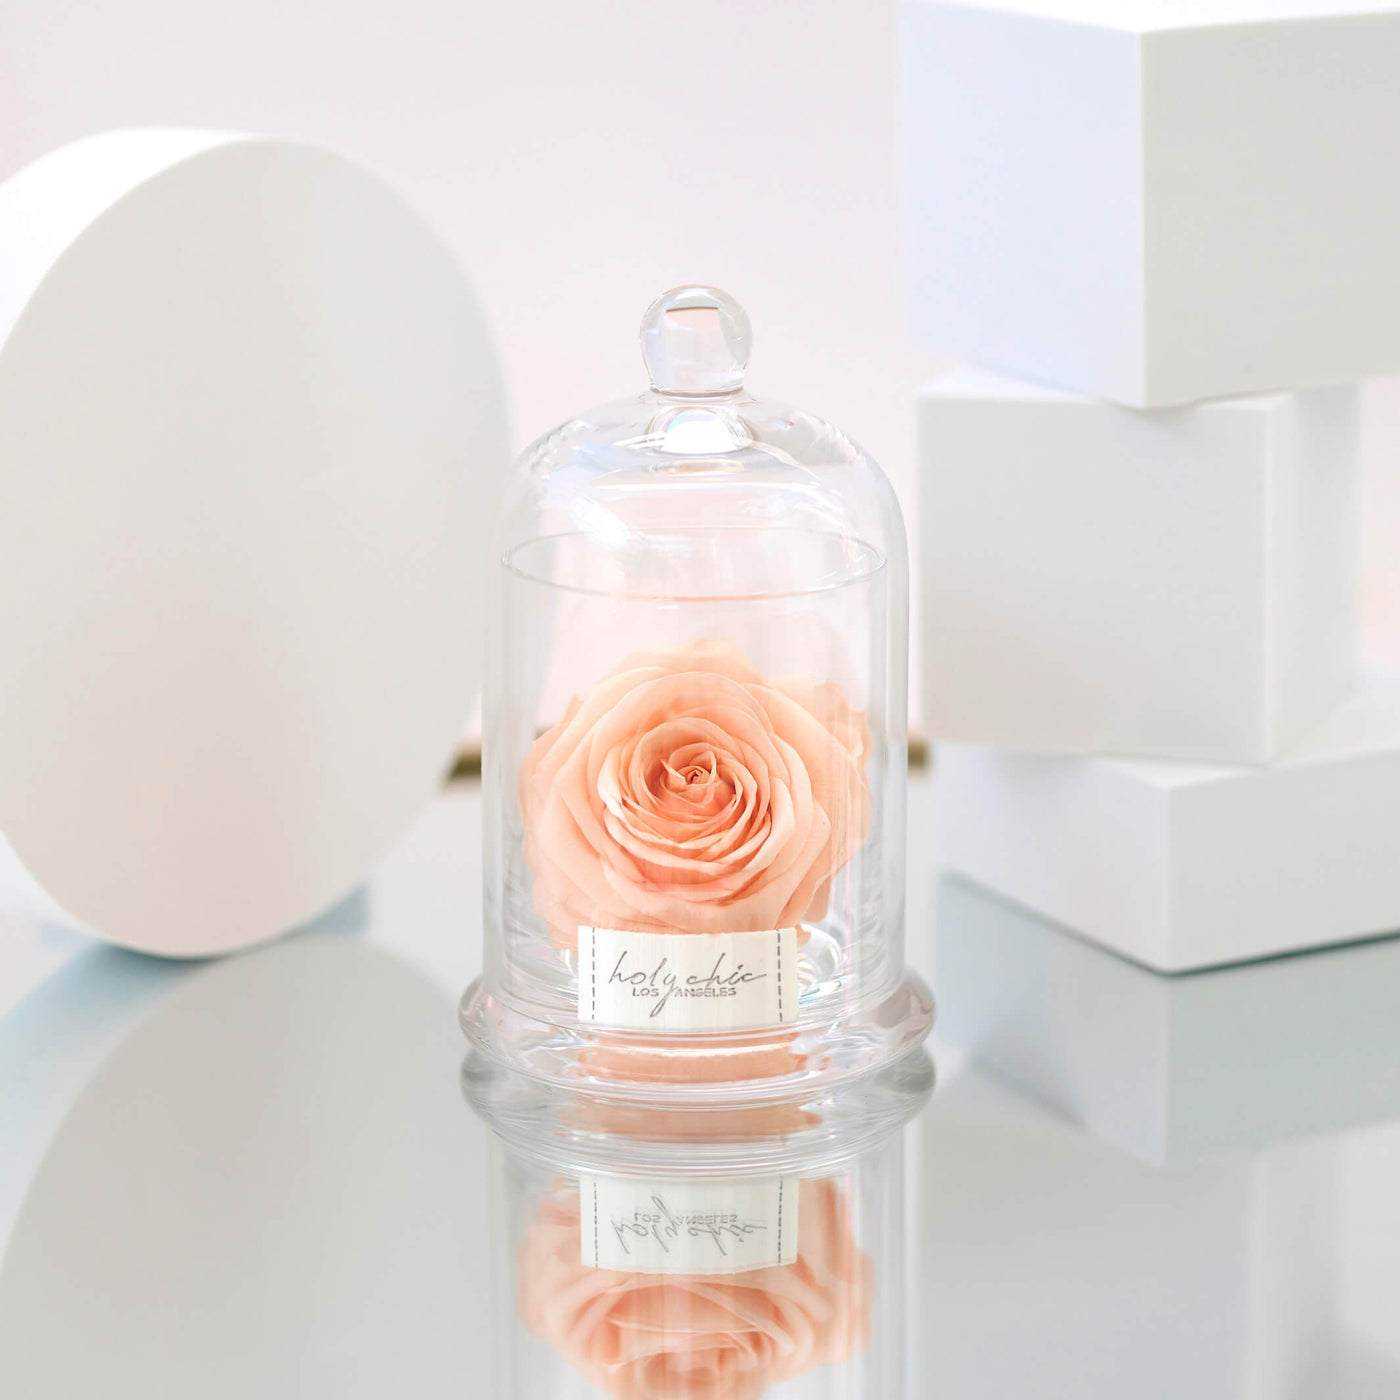 Forever rose in a medium size clear glass dome